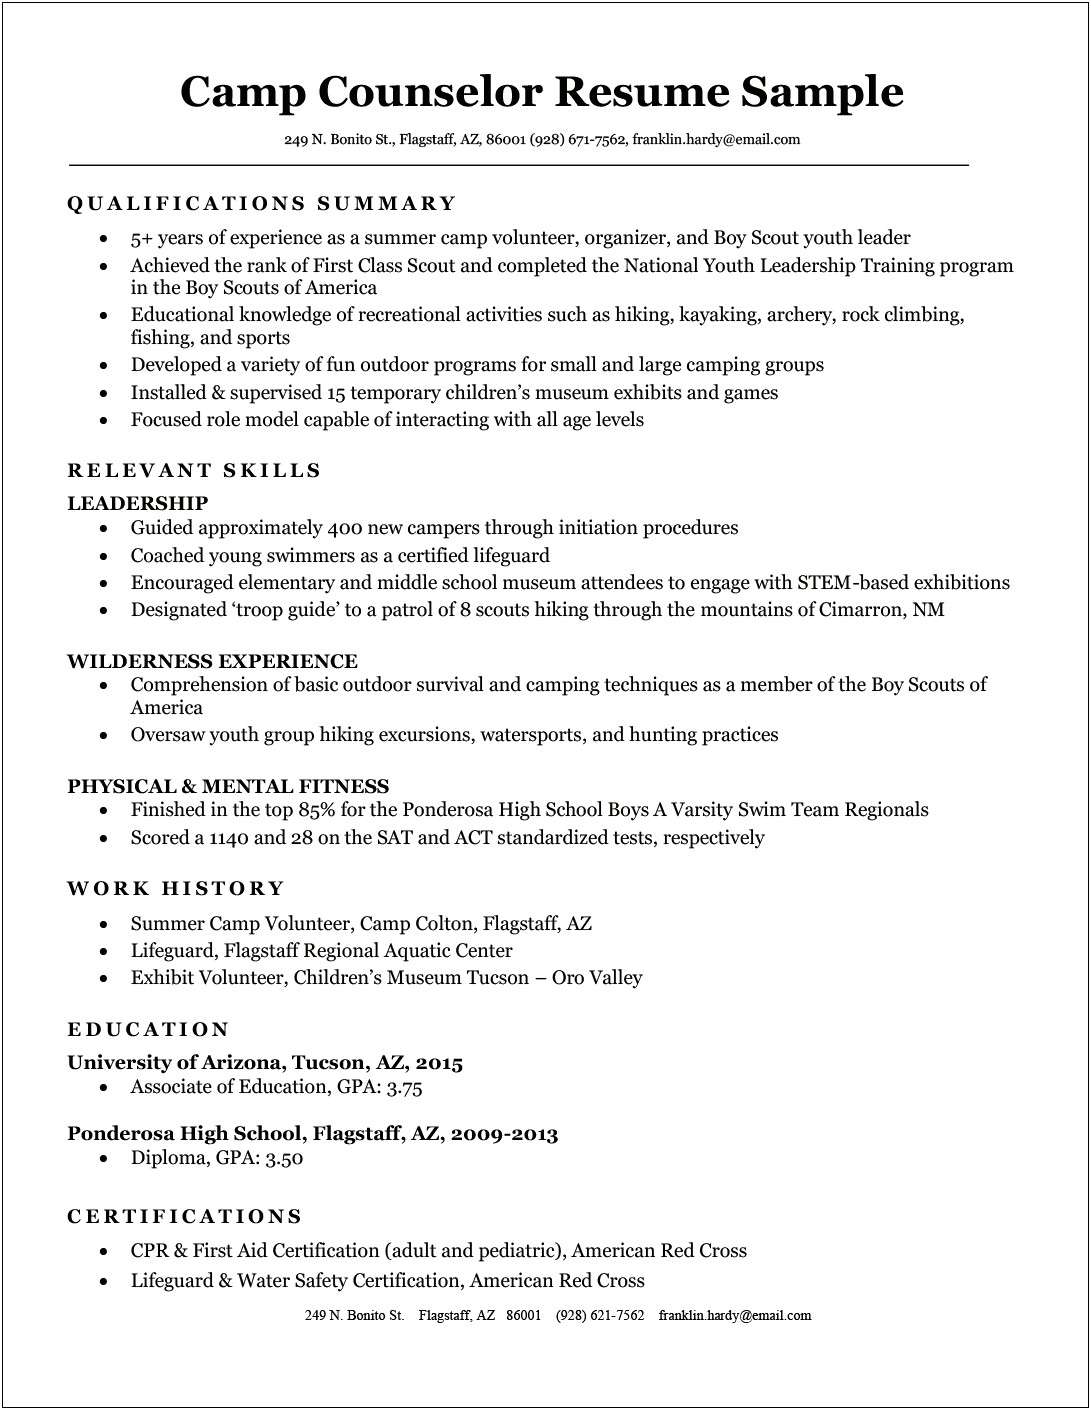 Impressive Resume For Guidance Counselor Jobs